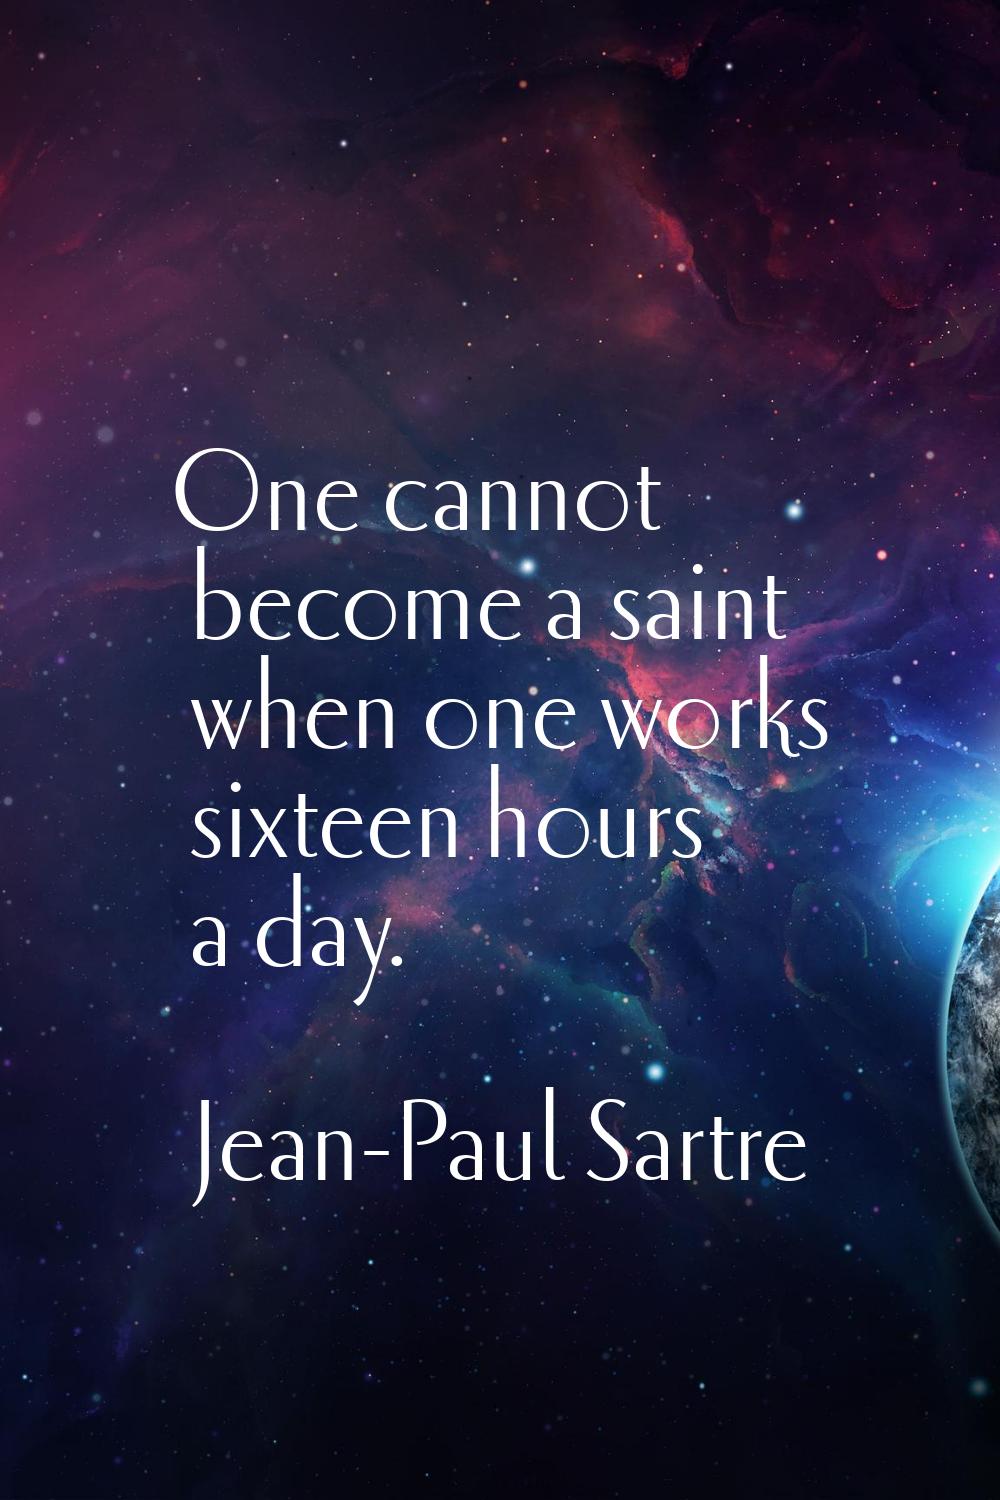 One cannot become a saint when one works sixteen hours a day.